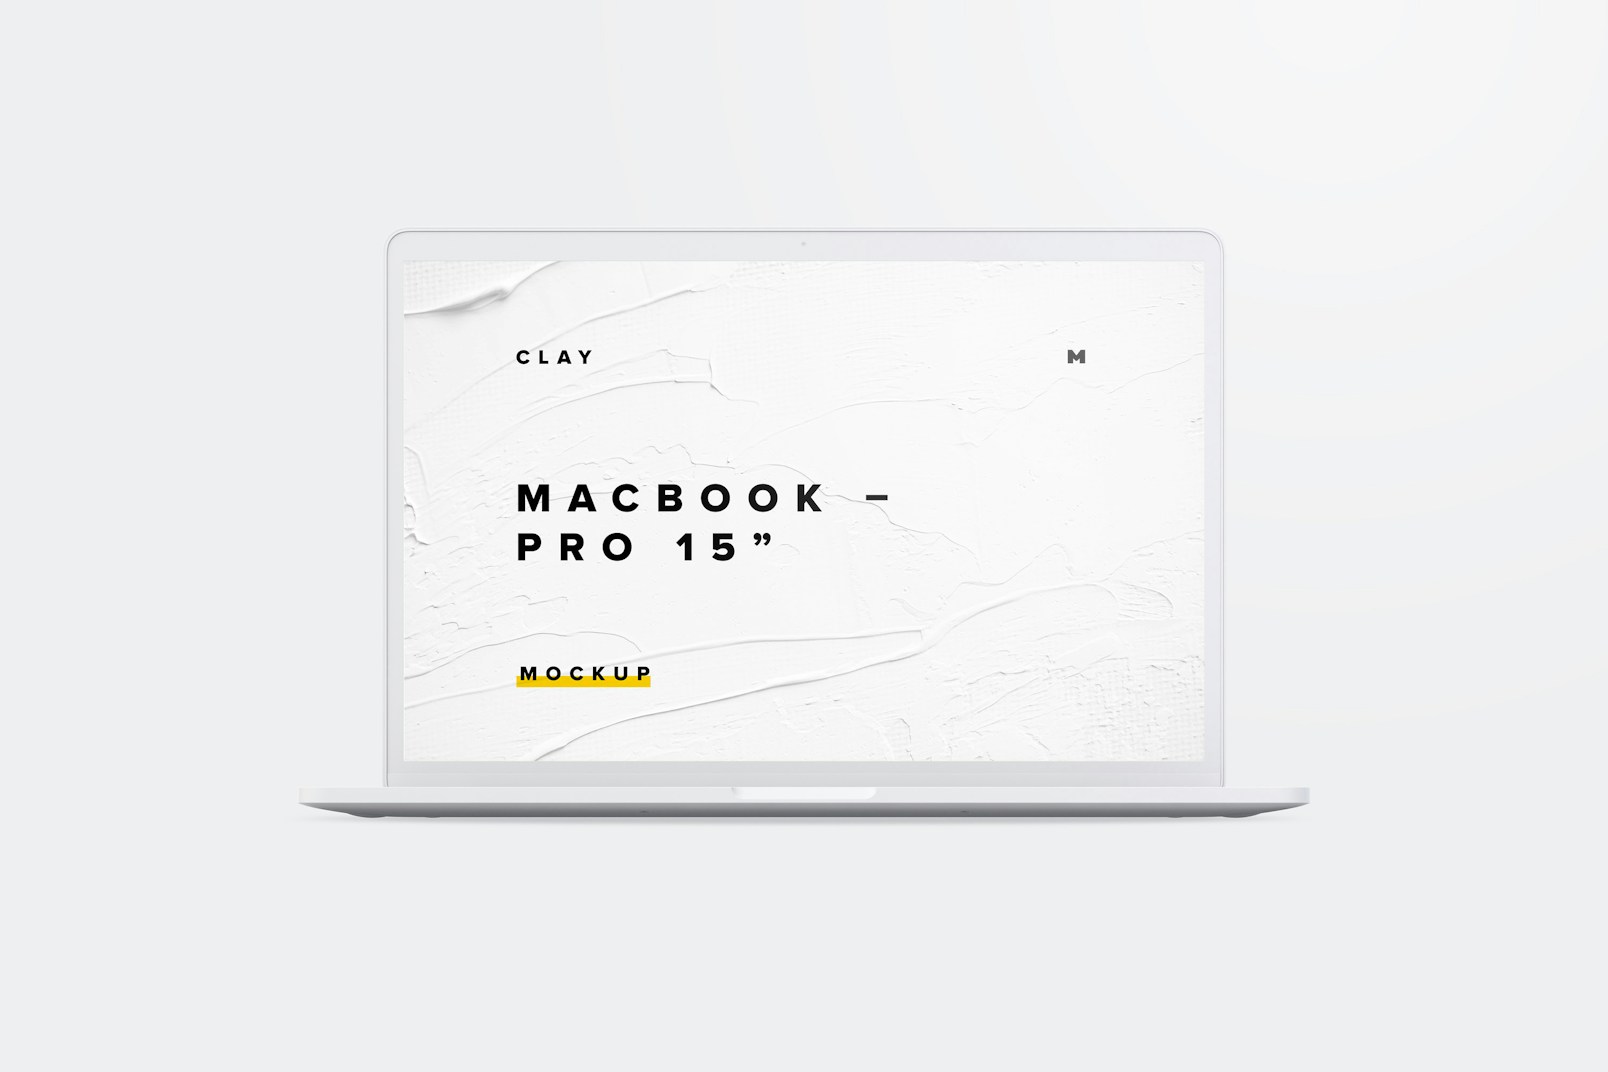 Clay MacBook Pro 15" with Touch Bar, Front View Mockup